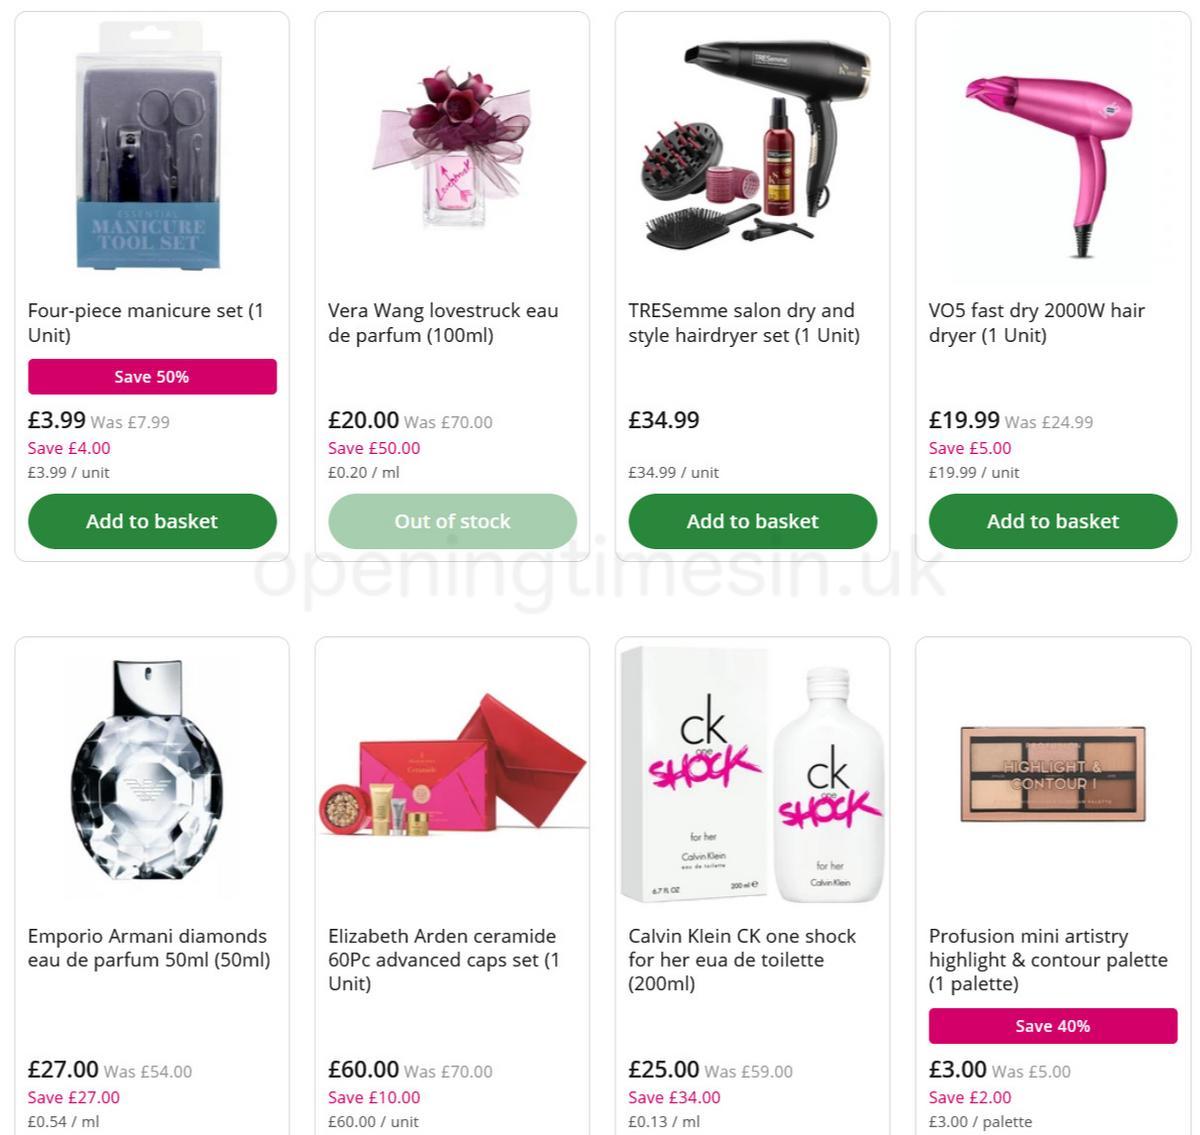 Lloyds Pharmacy Offers from 1 December